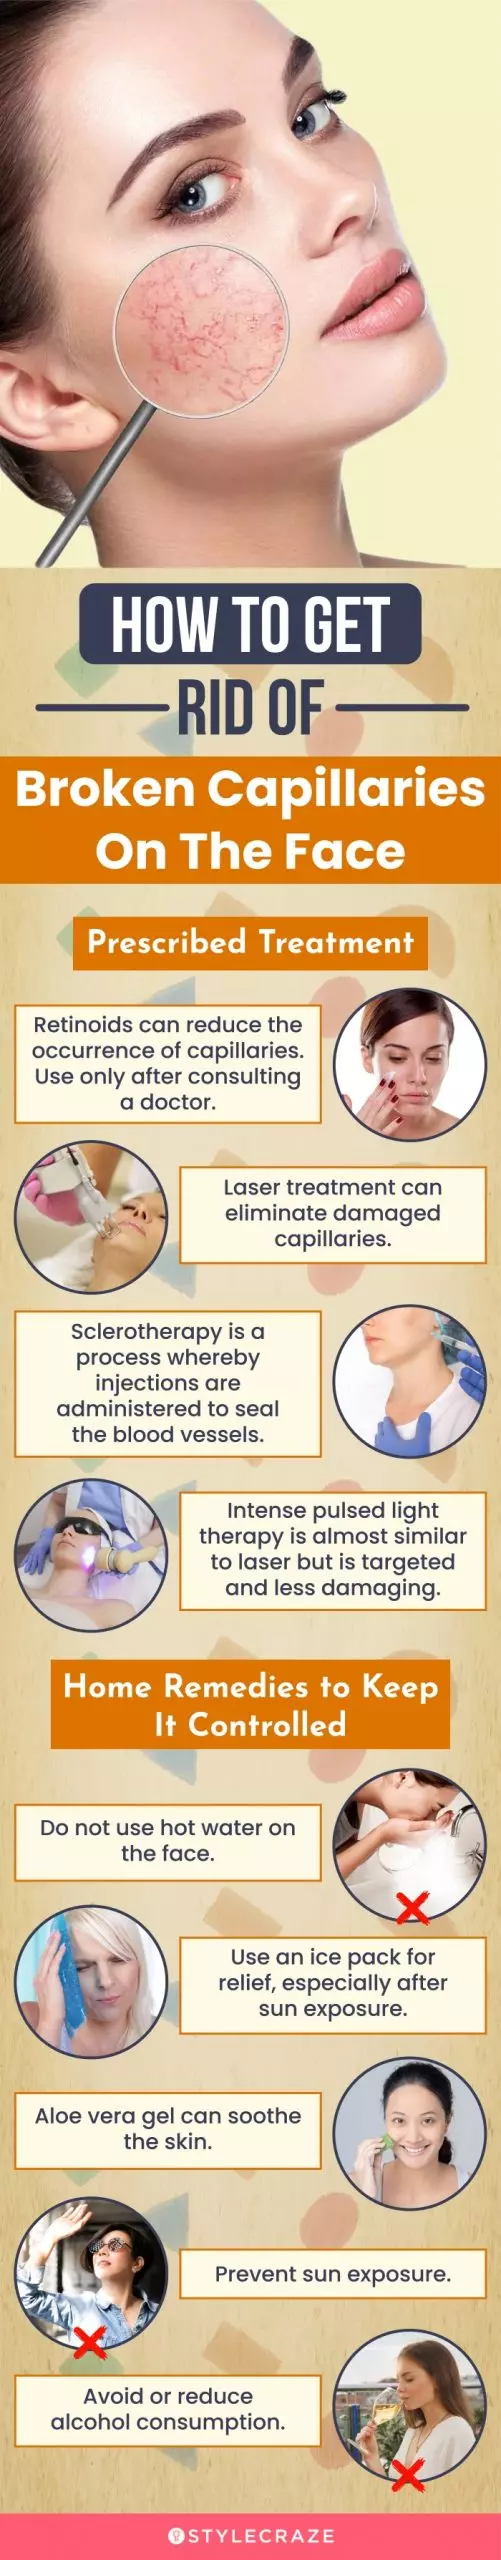 how to get rid of broken capillaries on face (infographic)